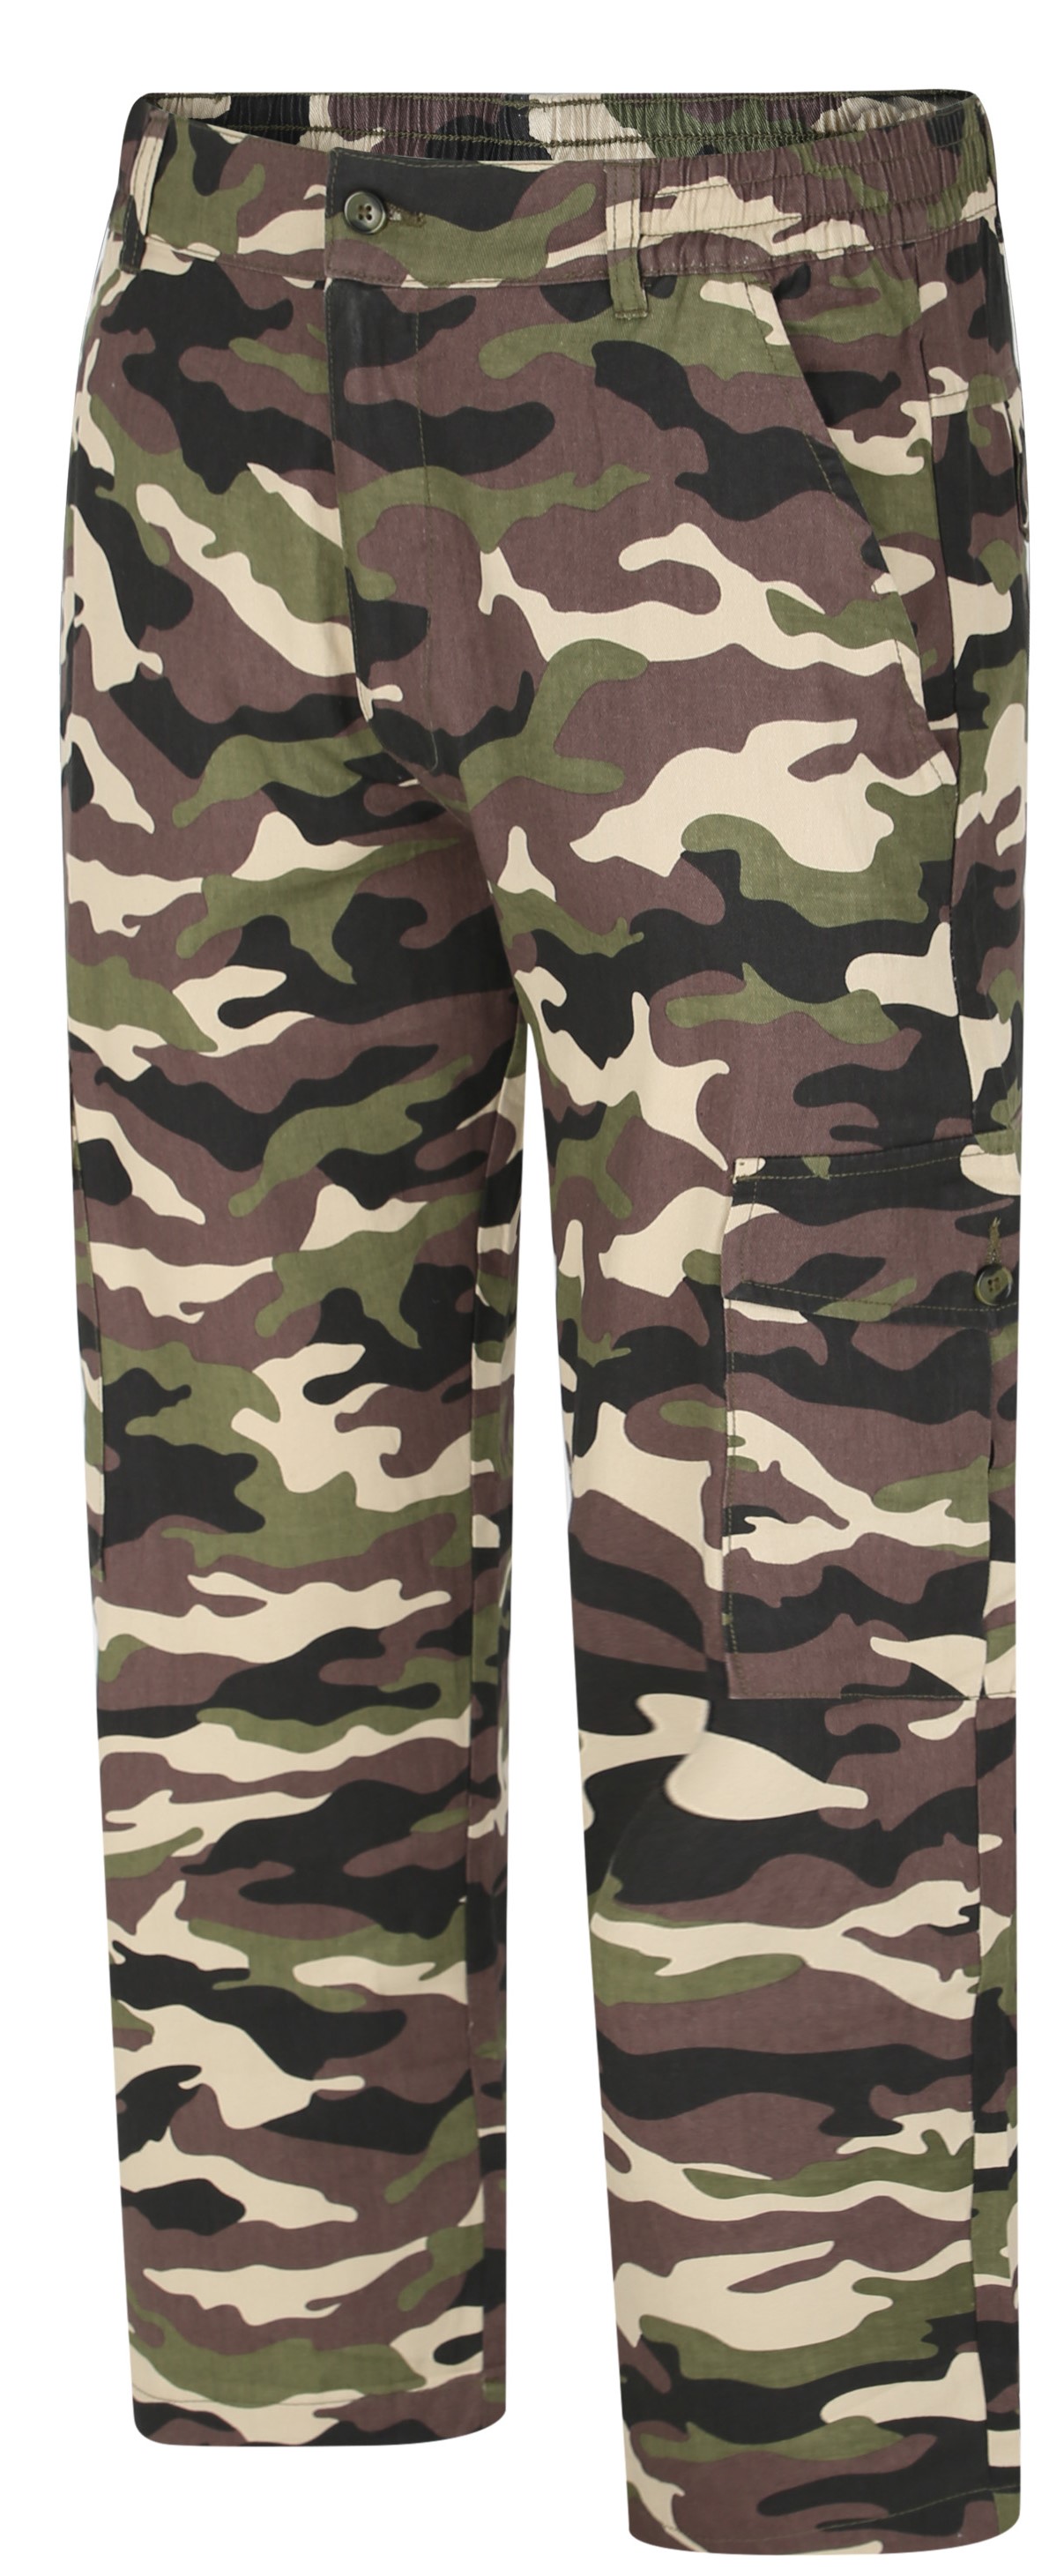 Acu Pants Camouflage Tactical Trousers Men's Woodland Digital Camo Pants  $8.35 - Wholesale China Acu Pants at factory prices from Shenzhen UD-TeK  Technology Co.,Ltd. | Globalsources.com